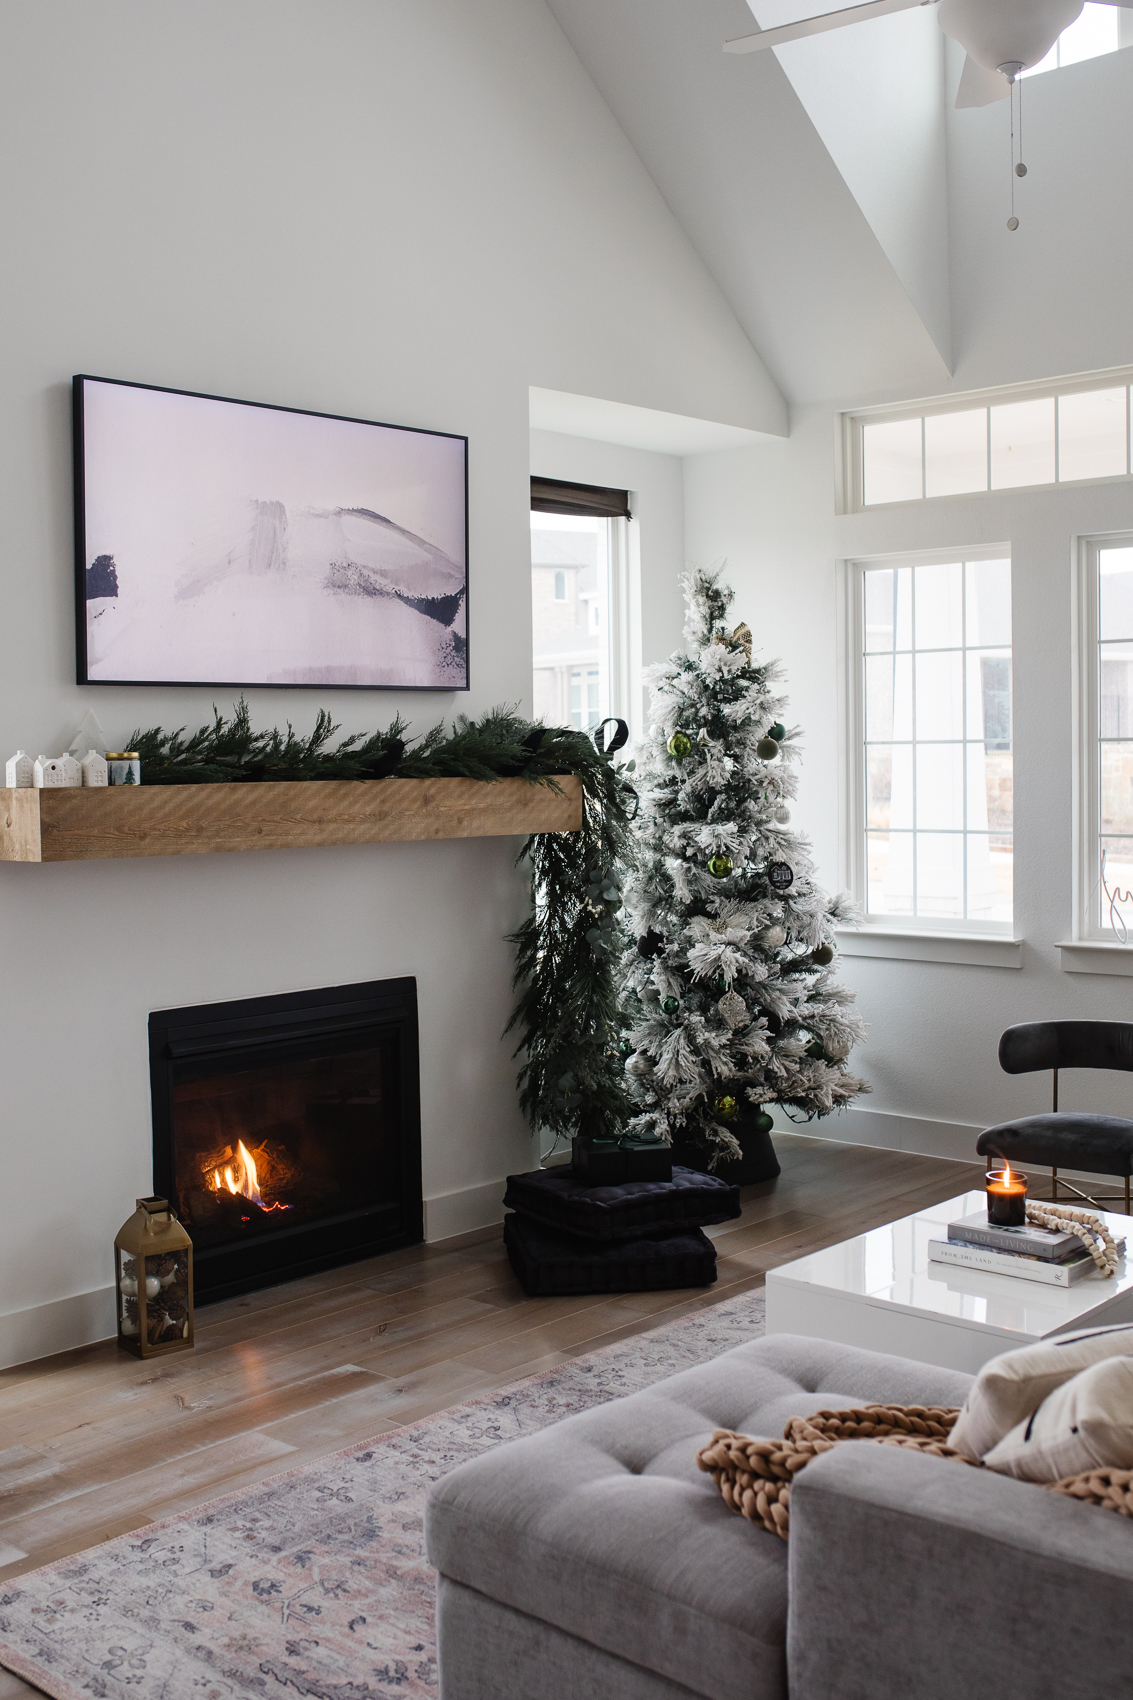 Samsung Frame TV in living room with vaulted ceilings, mantle and modern Christmas decor